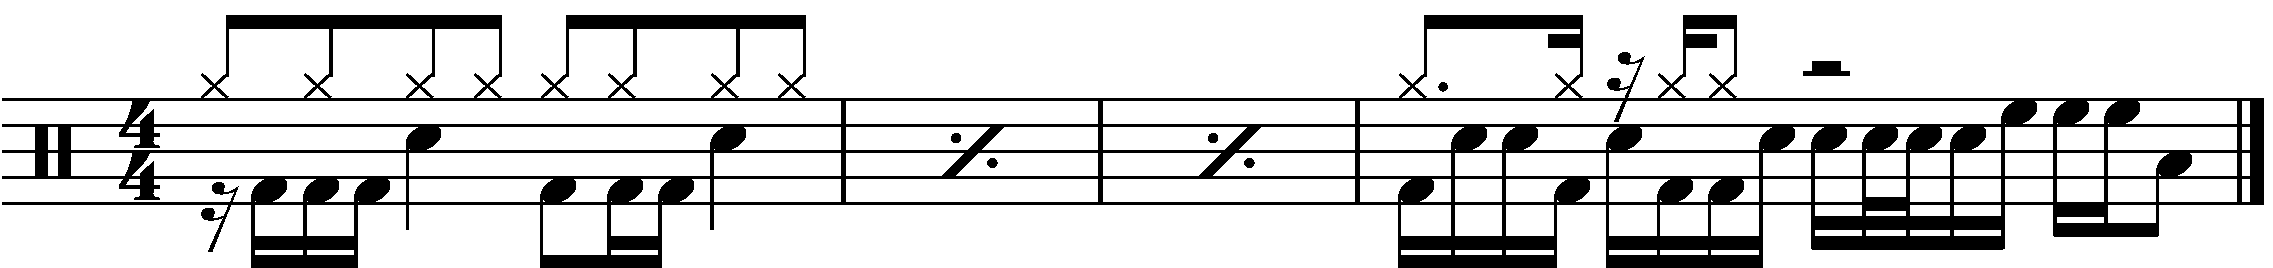 A short phrase using an inverted paradiddle fill